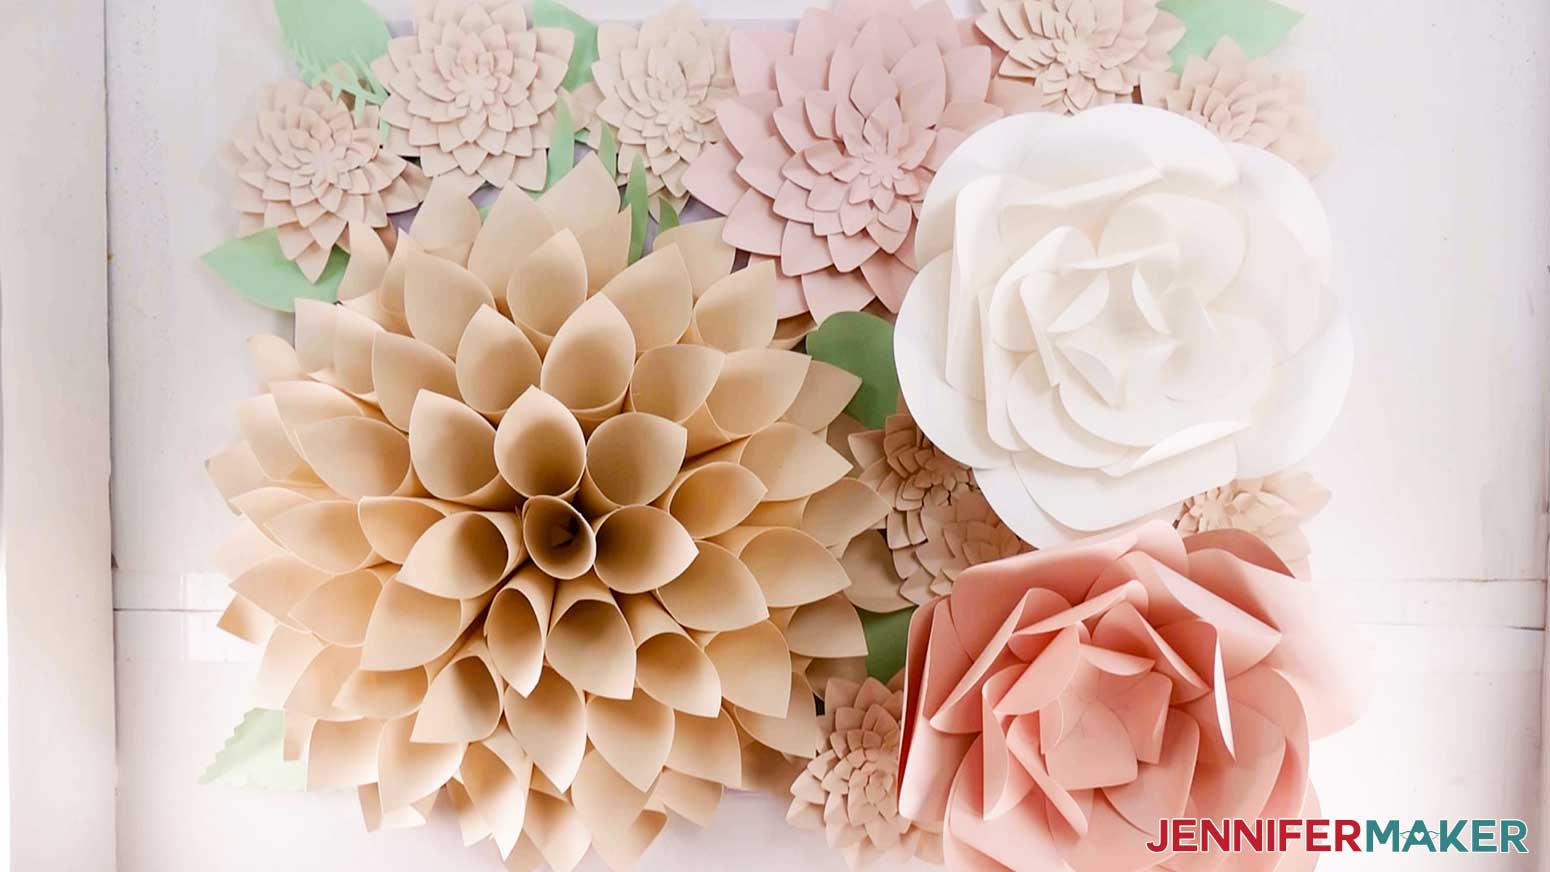 A test layout featuring the cone dahlia for the paper flower backdrop.